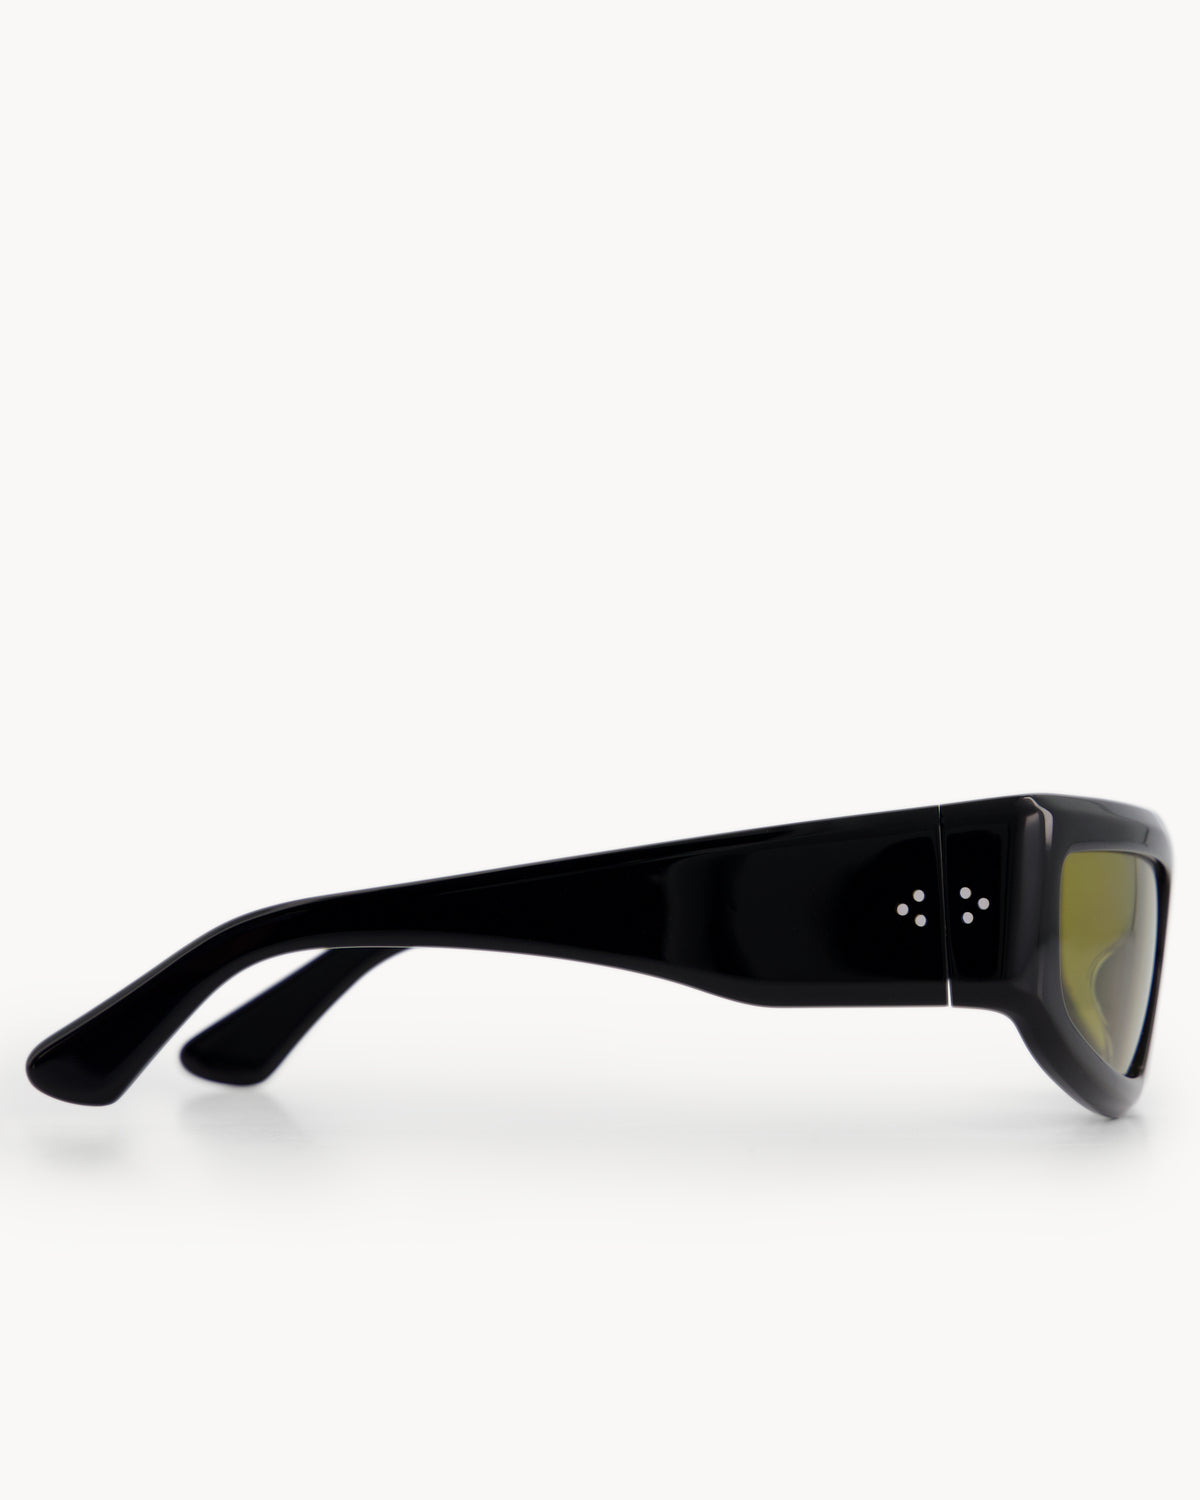 Port Tanger Andalucia Sunglasses in Black Acetate and Warm Olive Lenses 4